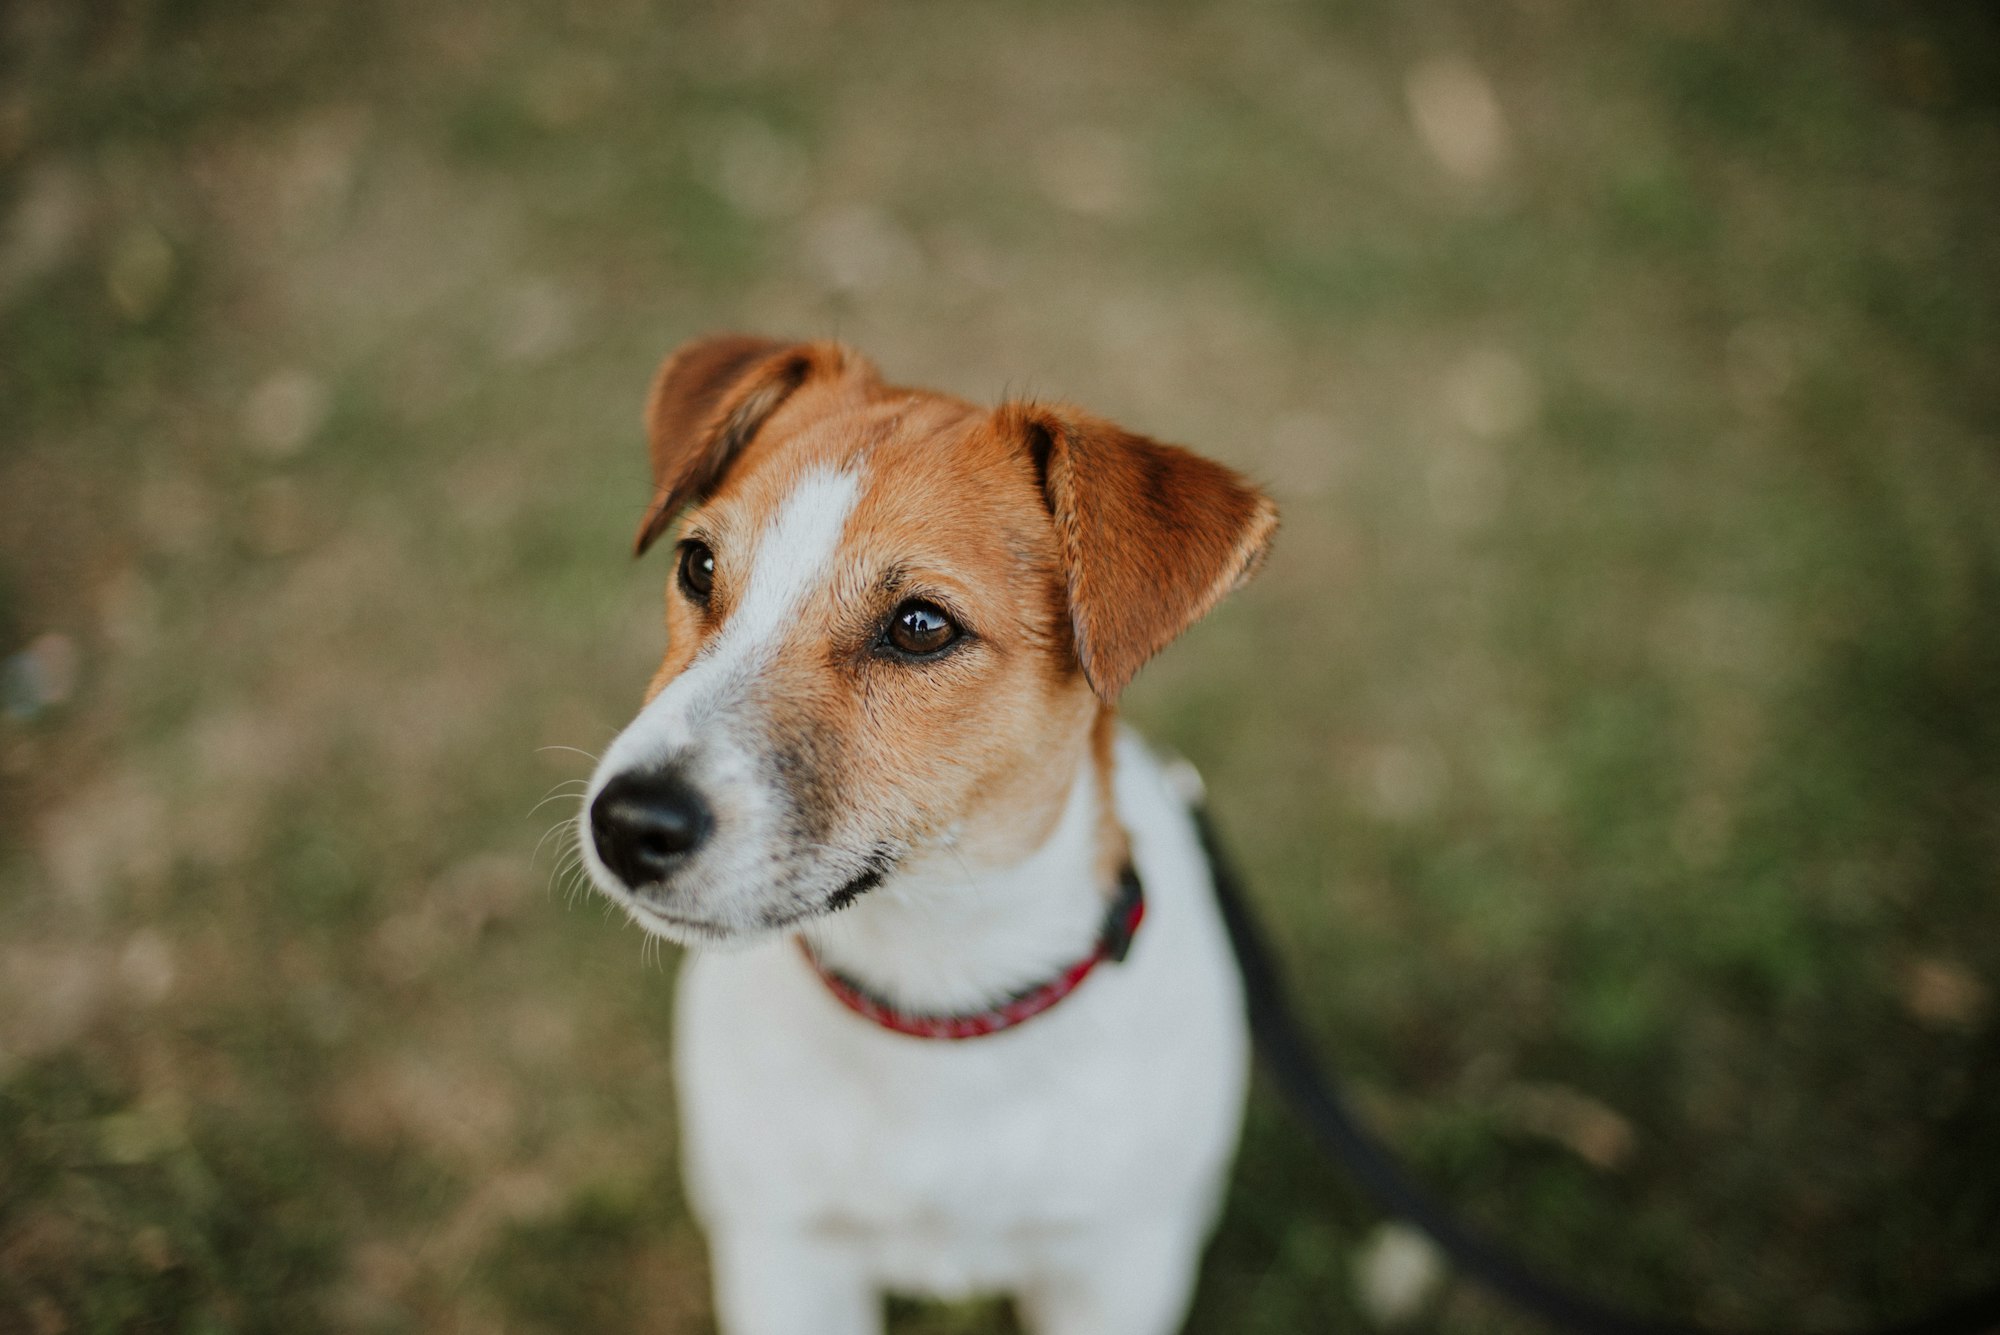 What Was the Jack Russell Terrier Bred For